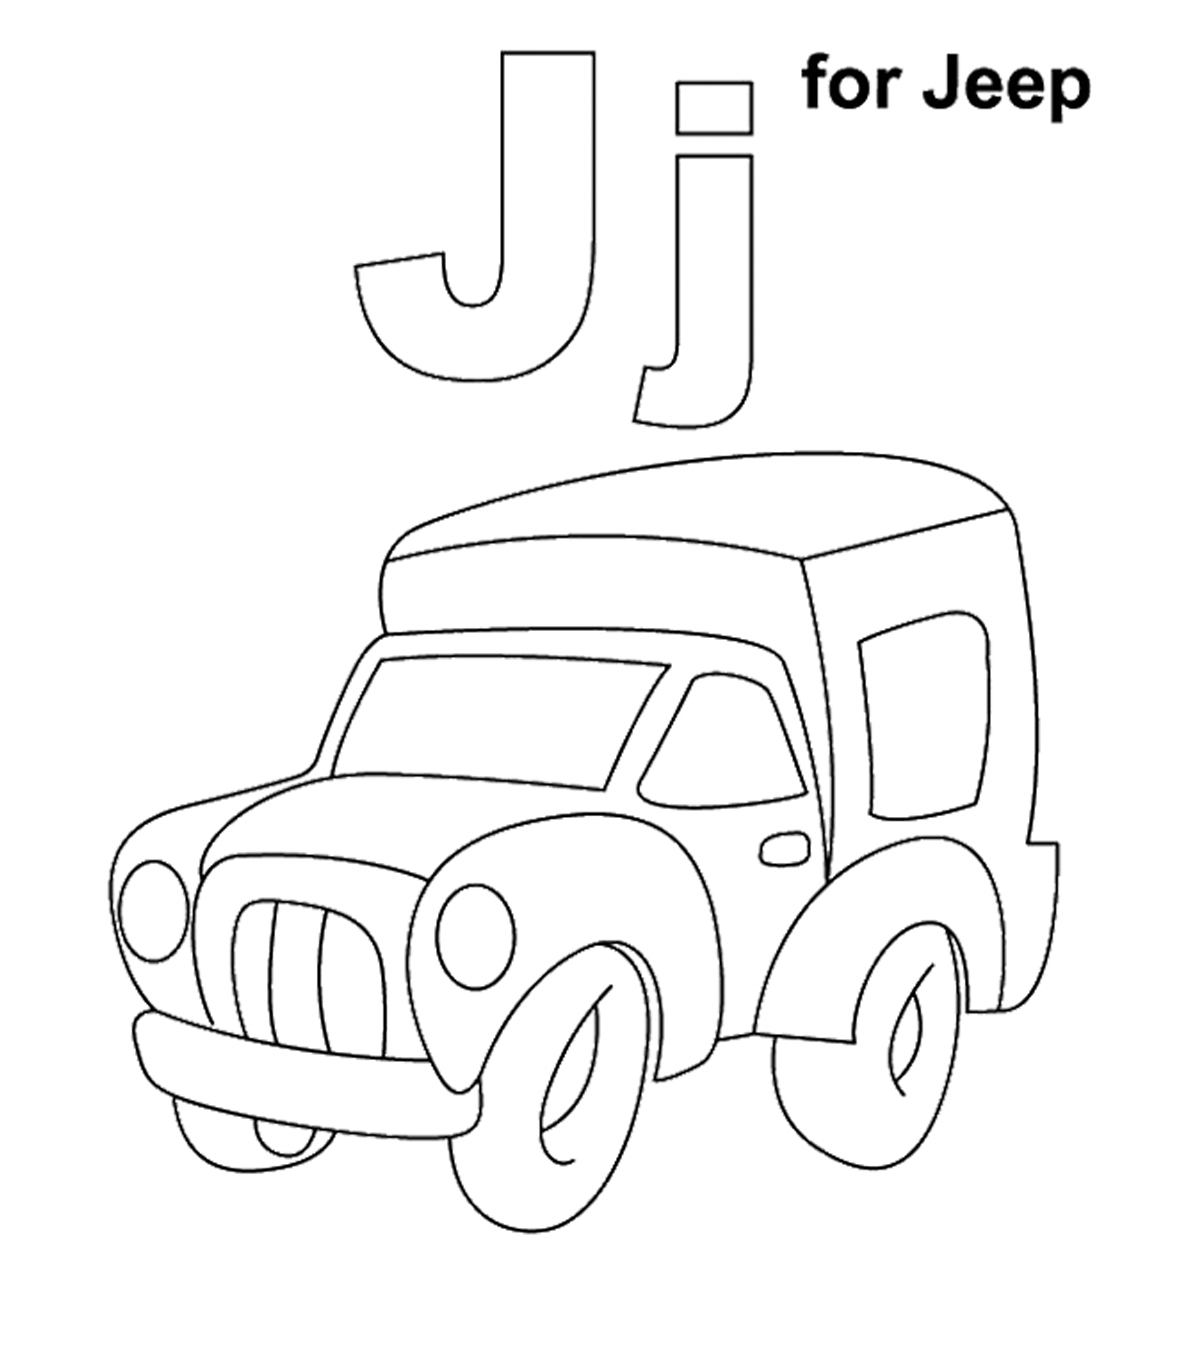 Coloring Pages Of J Top 10 Free Printable Letter J Coloring Pages Online